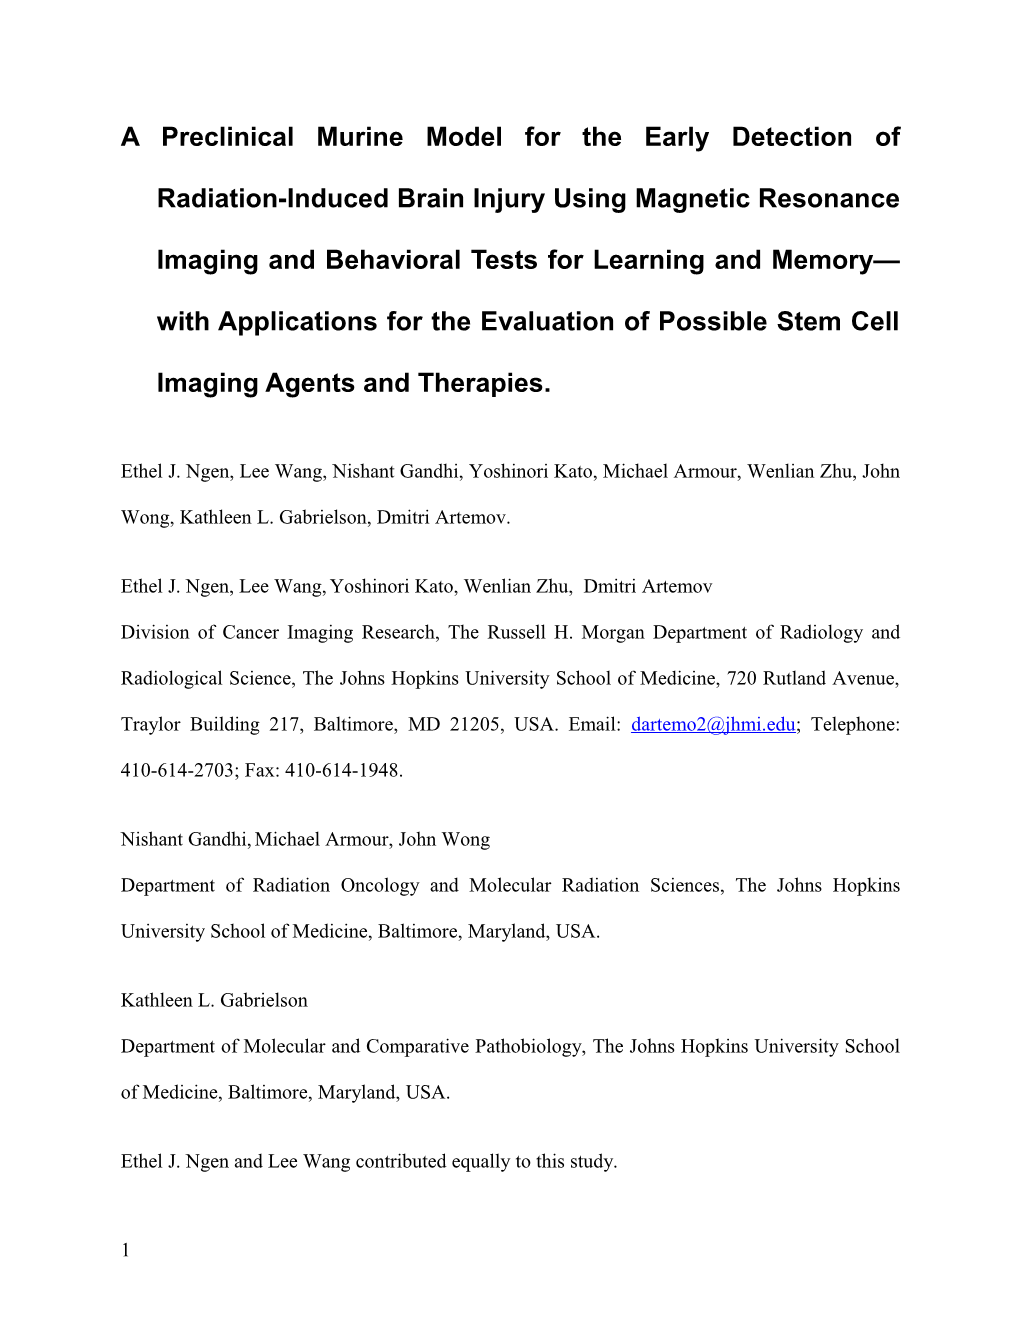 A Preclinical Murine Model for the Early Detection of Radiation-Induced Brain Injury Using